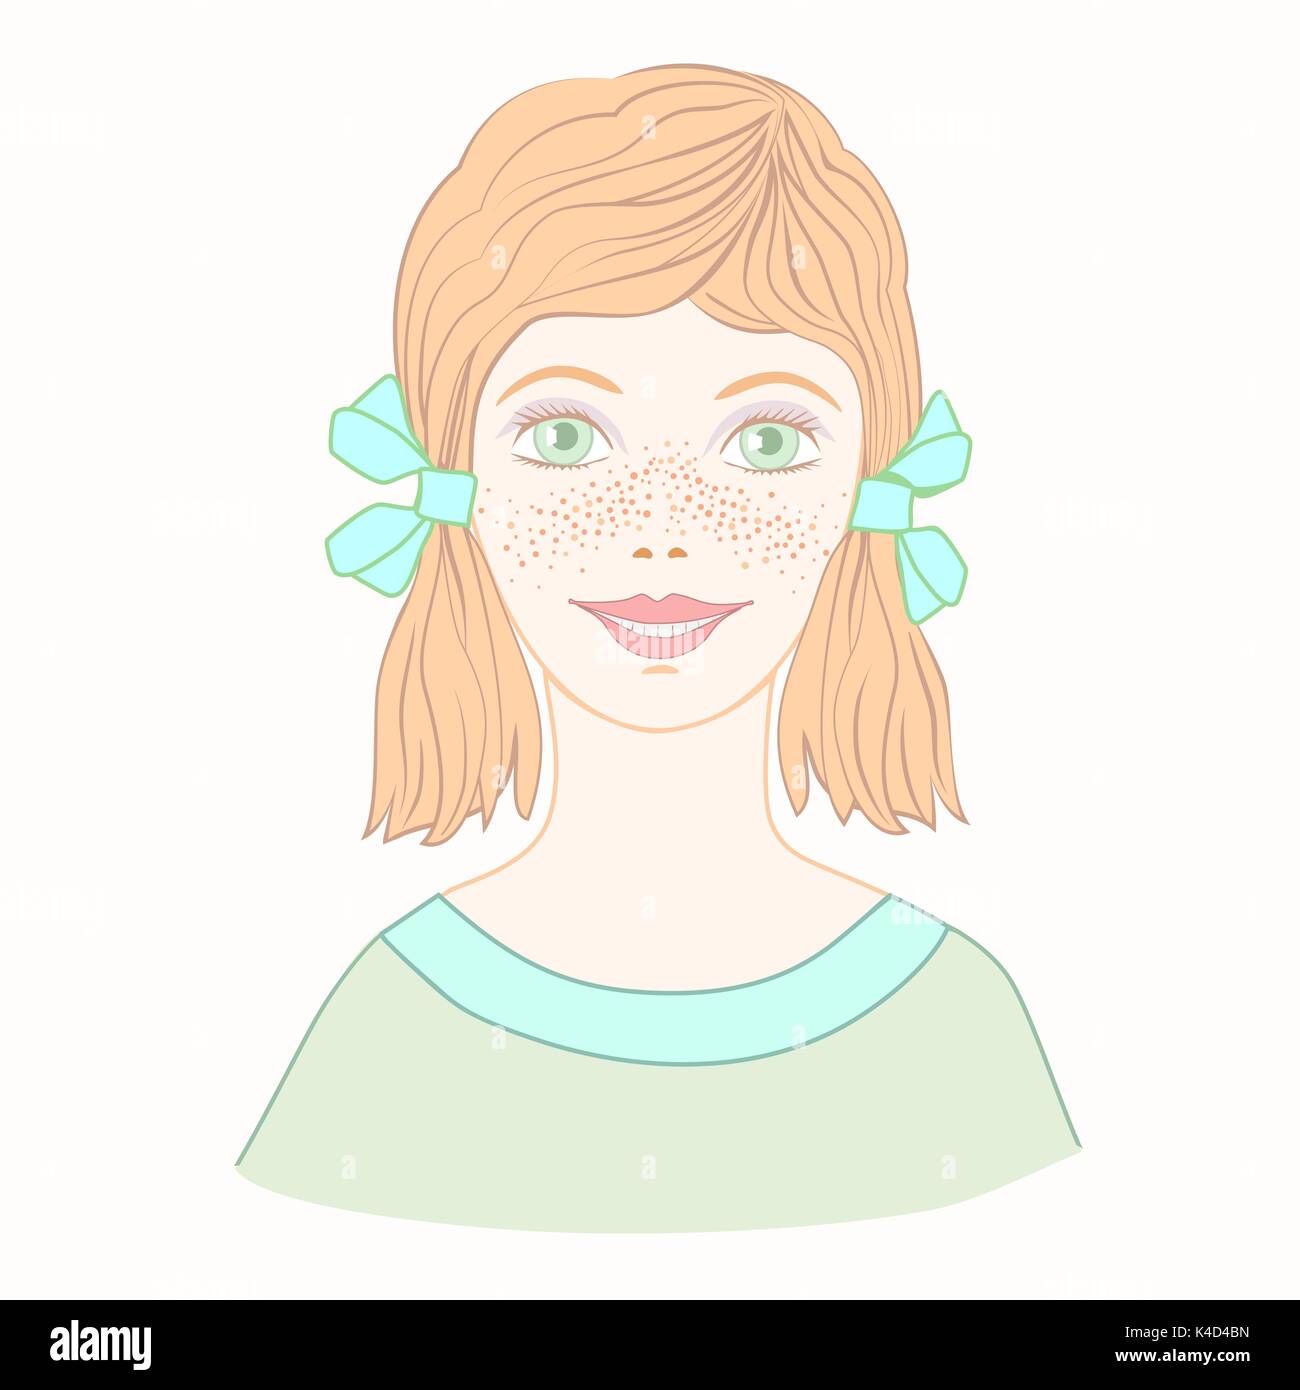 Cheerful cute young girl with freckles and red curly hair Stock Vector